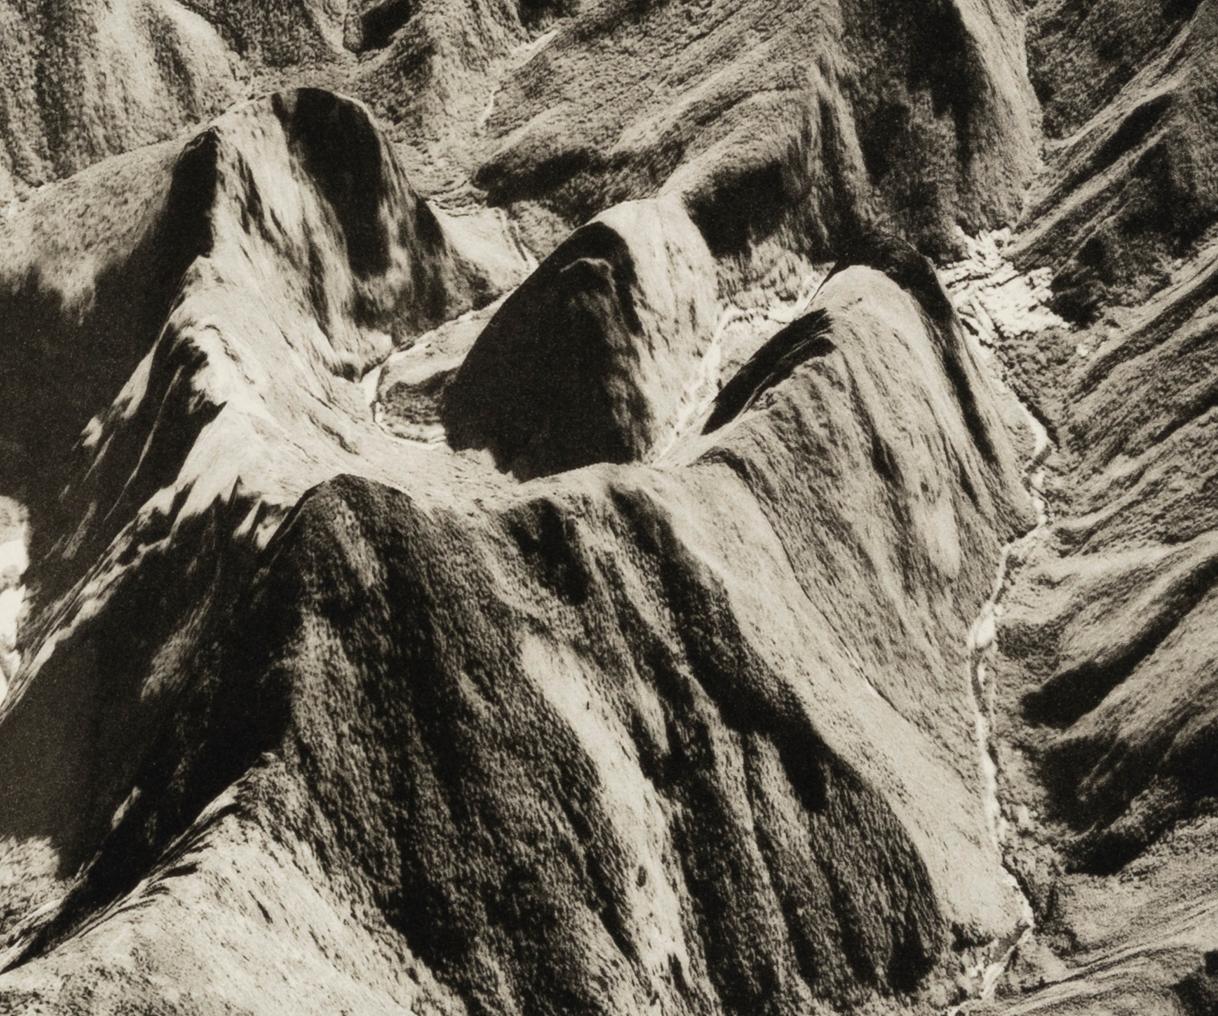 Beth Ganz, 'Machu Picchu, Peru', copperplate photogravure etching, edition 10, 2021. Signed, titled, and numbered 6/10 in pencil. A superb, richly-inked impression in warm black ink, on cream, wove, cotton rag paper; the full sheet in excellent